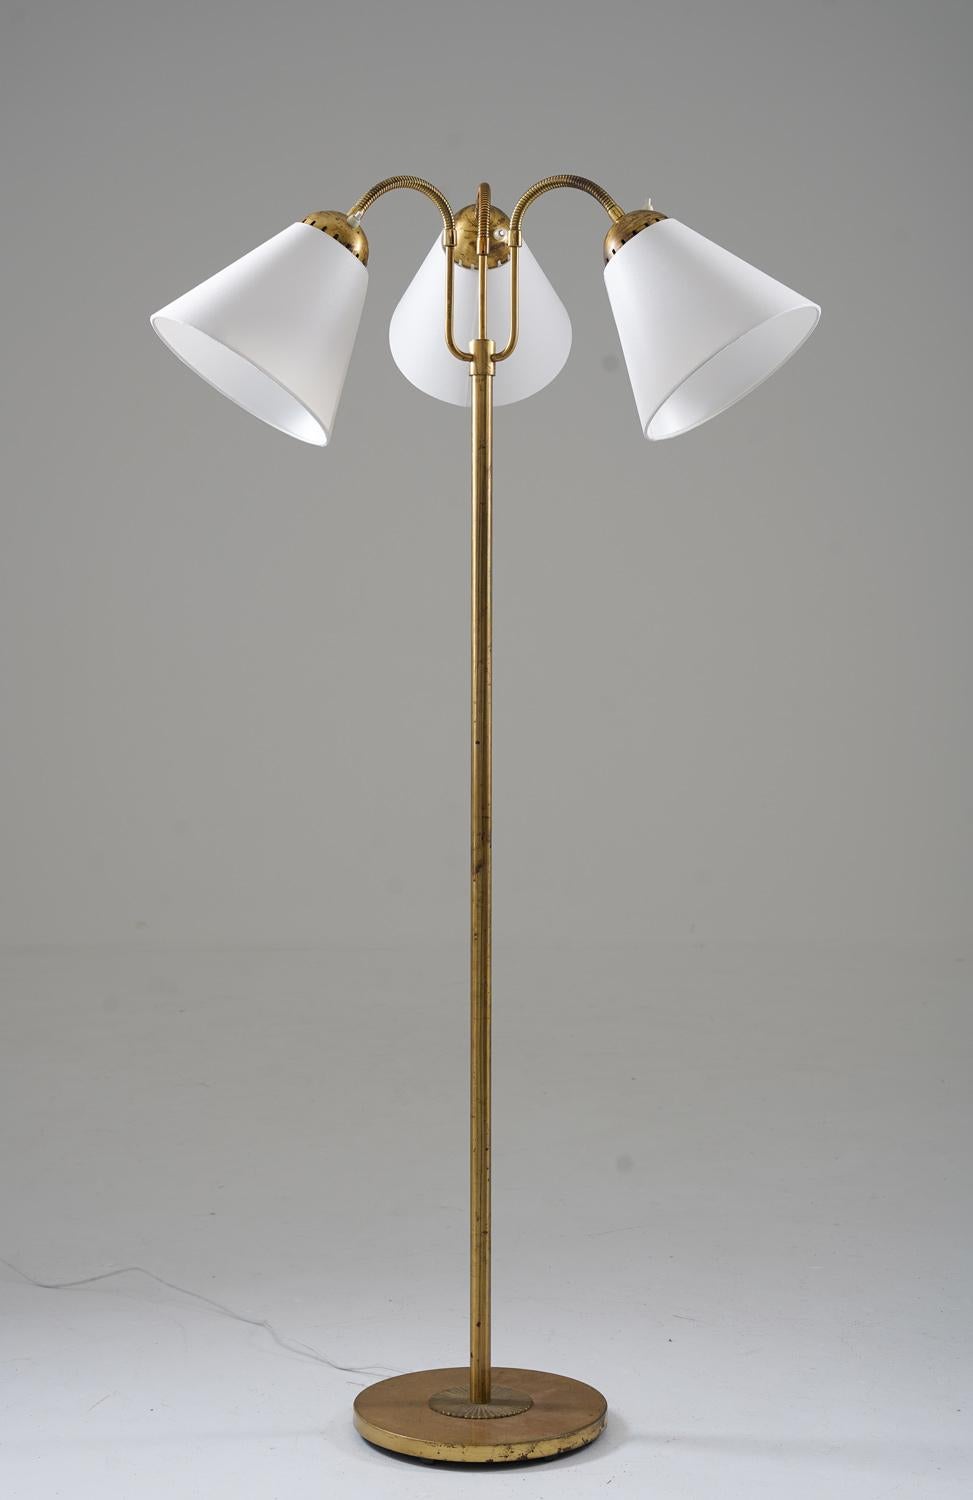 Presenting a captivating Swedish Modern floor lamp from the 1940s, expertly manufactured by Böhlmarks. This exquisite piece features three adjustable light sources, adding a touch of versatility to its design.

Maintaining its original charm, the